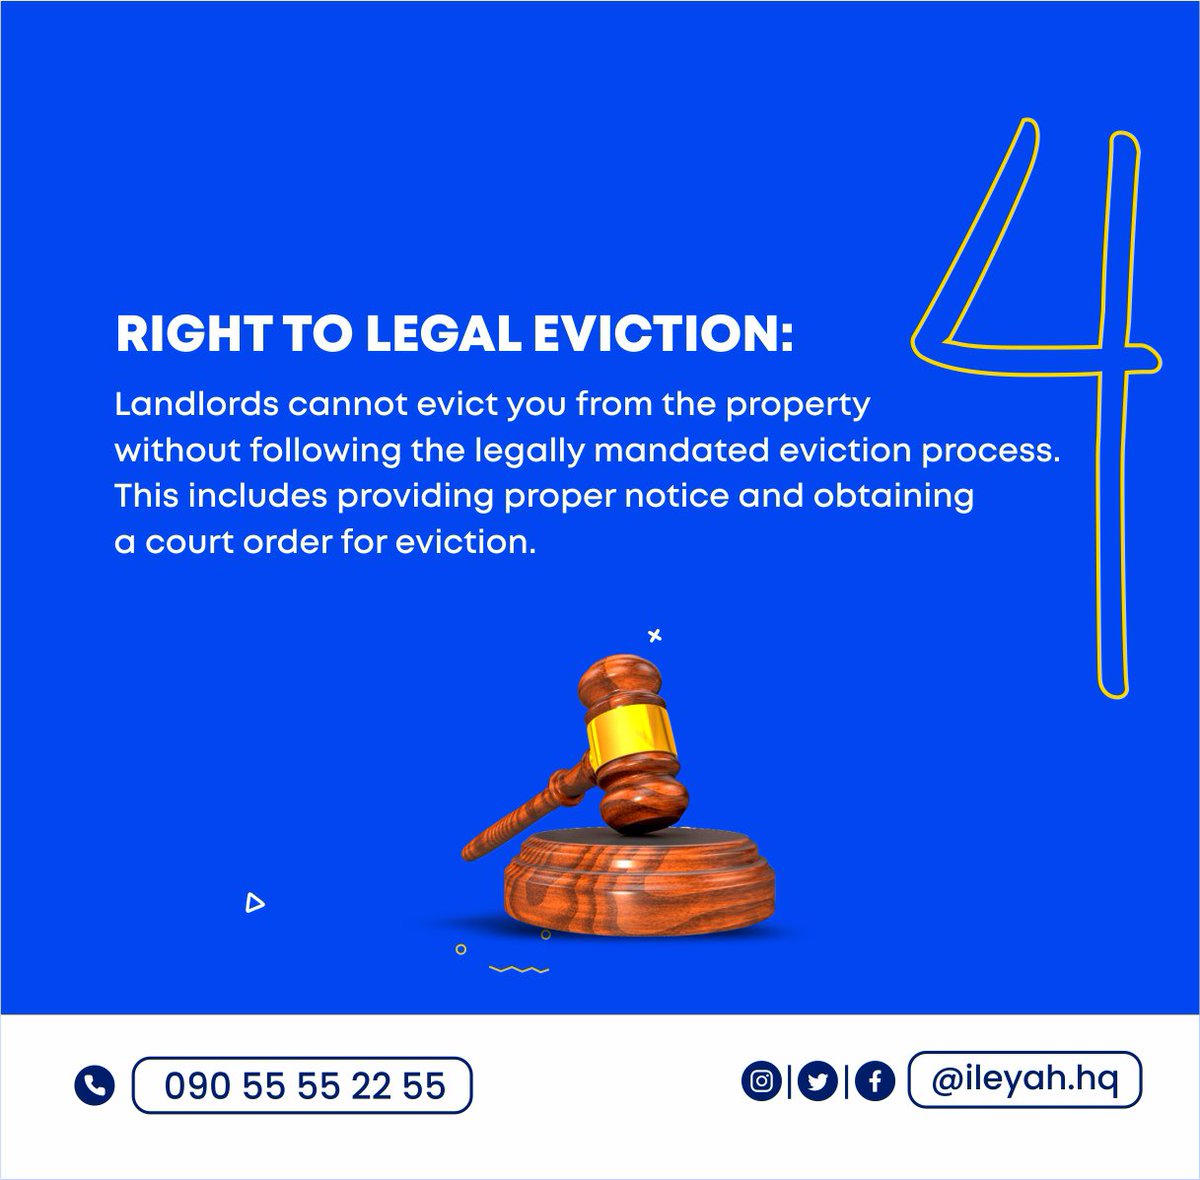 Tenancy Law,
Your landlord hide this from vou &
Let us know if you know this Law before now, if you don't know about it before, is time to fight for it
#TenancyAgreement #tenants #lawoftheland